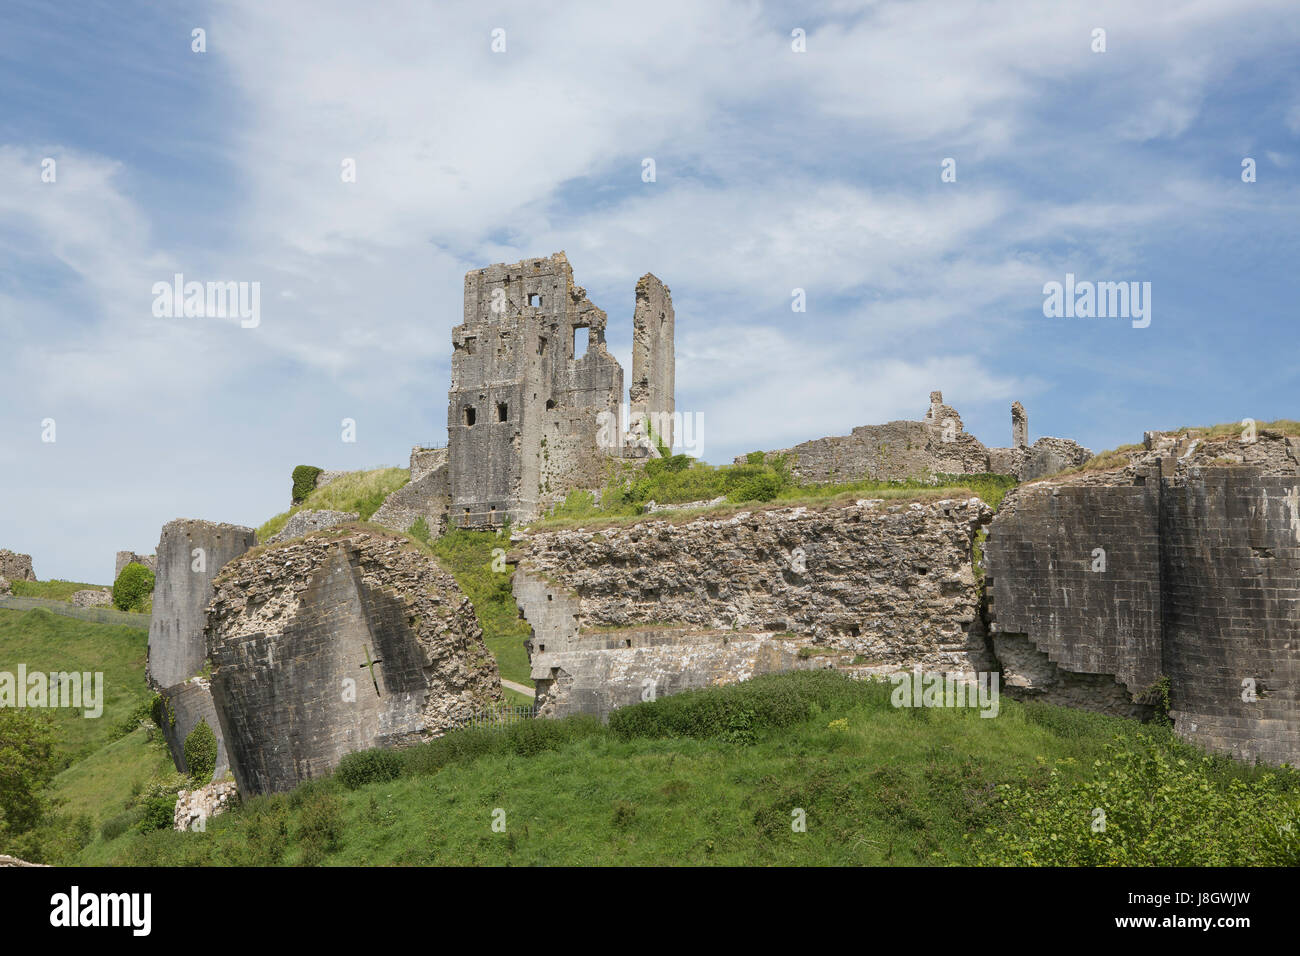 view of the damaged and subsiding outer wall of Corfe castle commanding a good position on a hilltop on the Isle of Purbeck in Dorset. Stock Photo